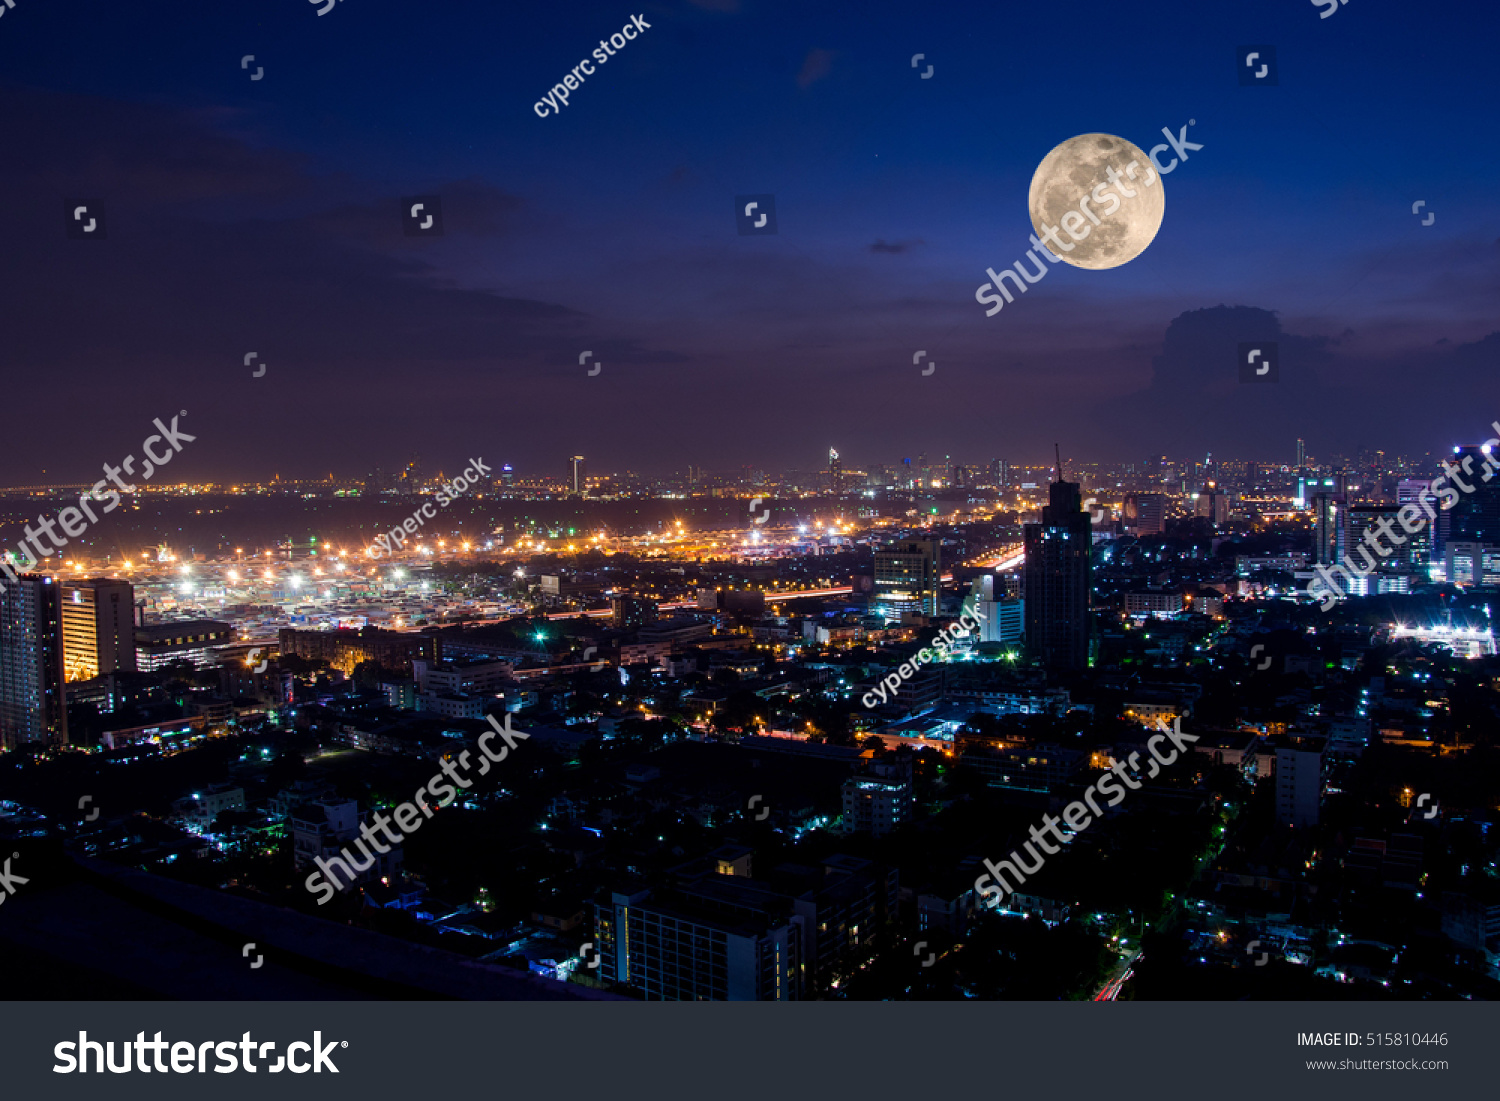 City Scape at night scene with super moon #515810446